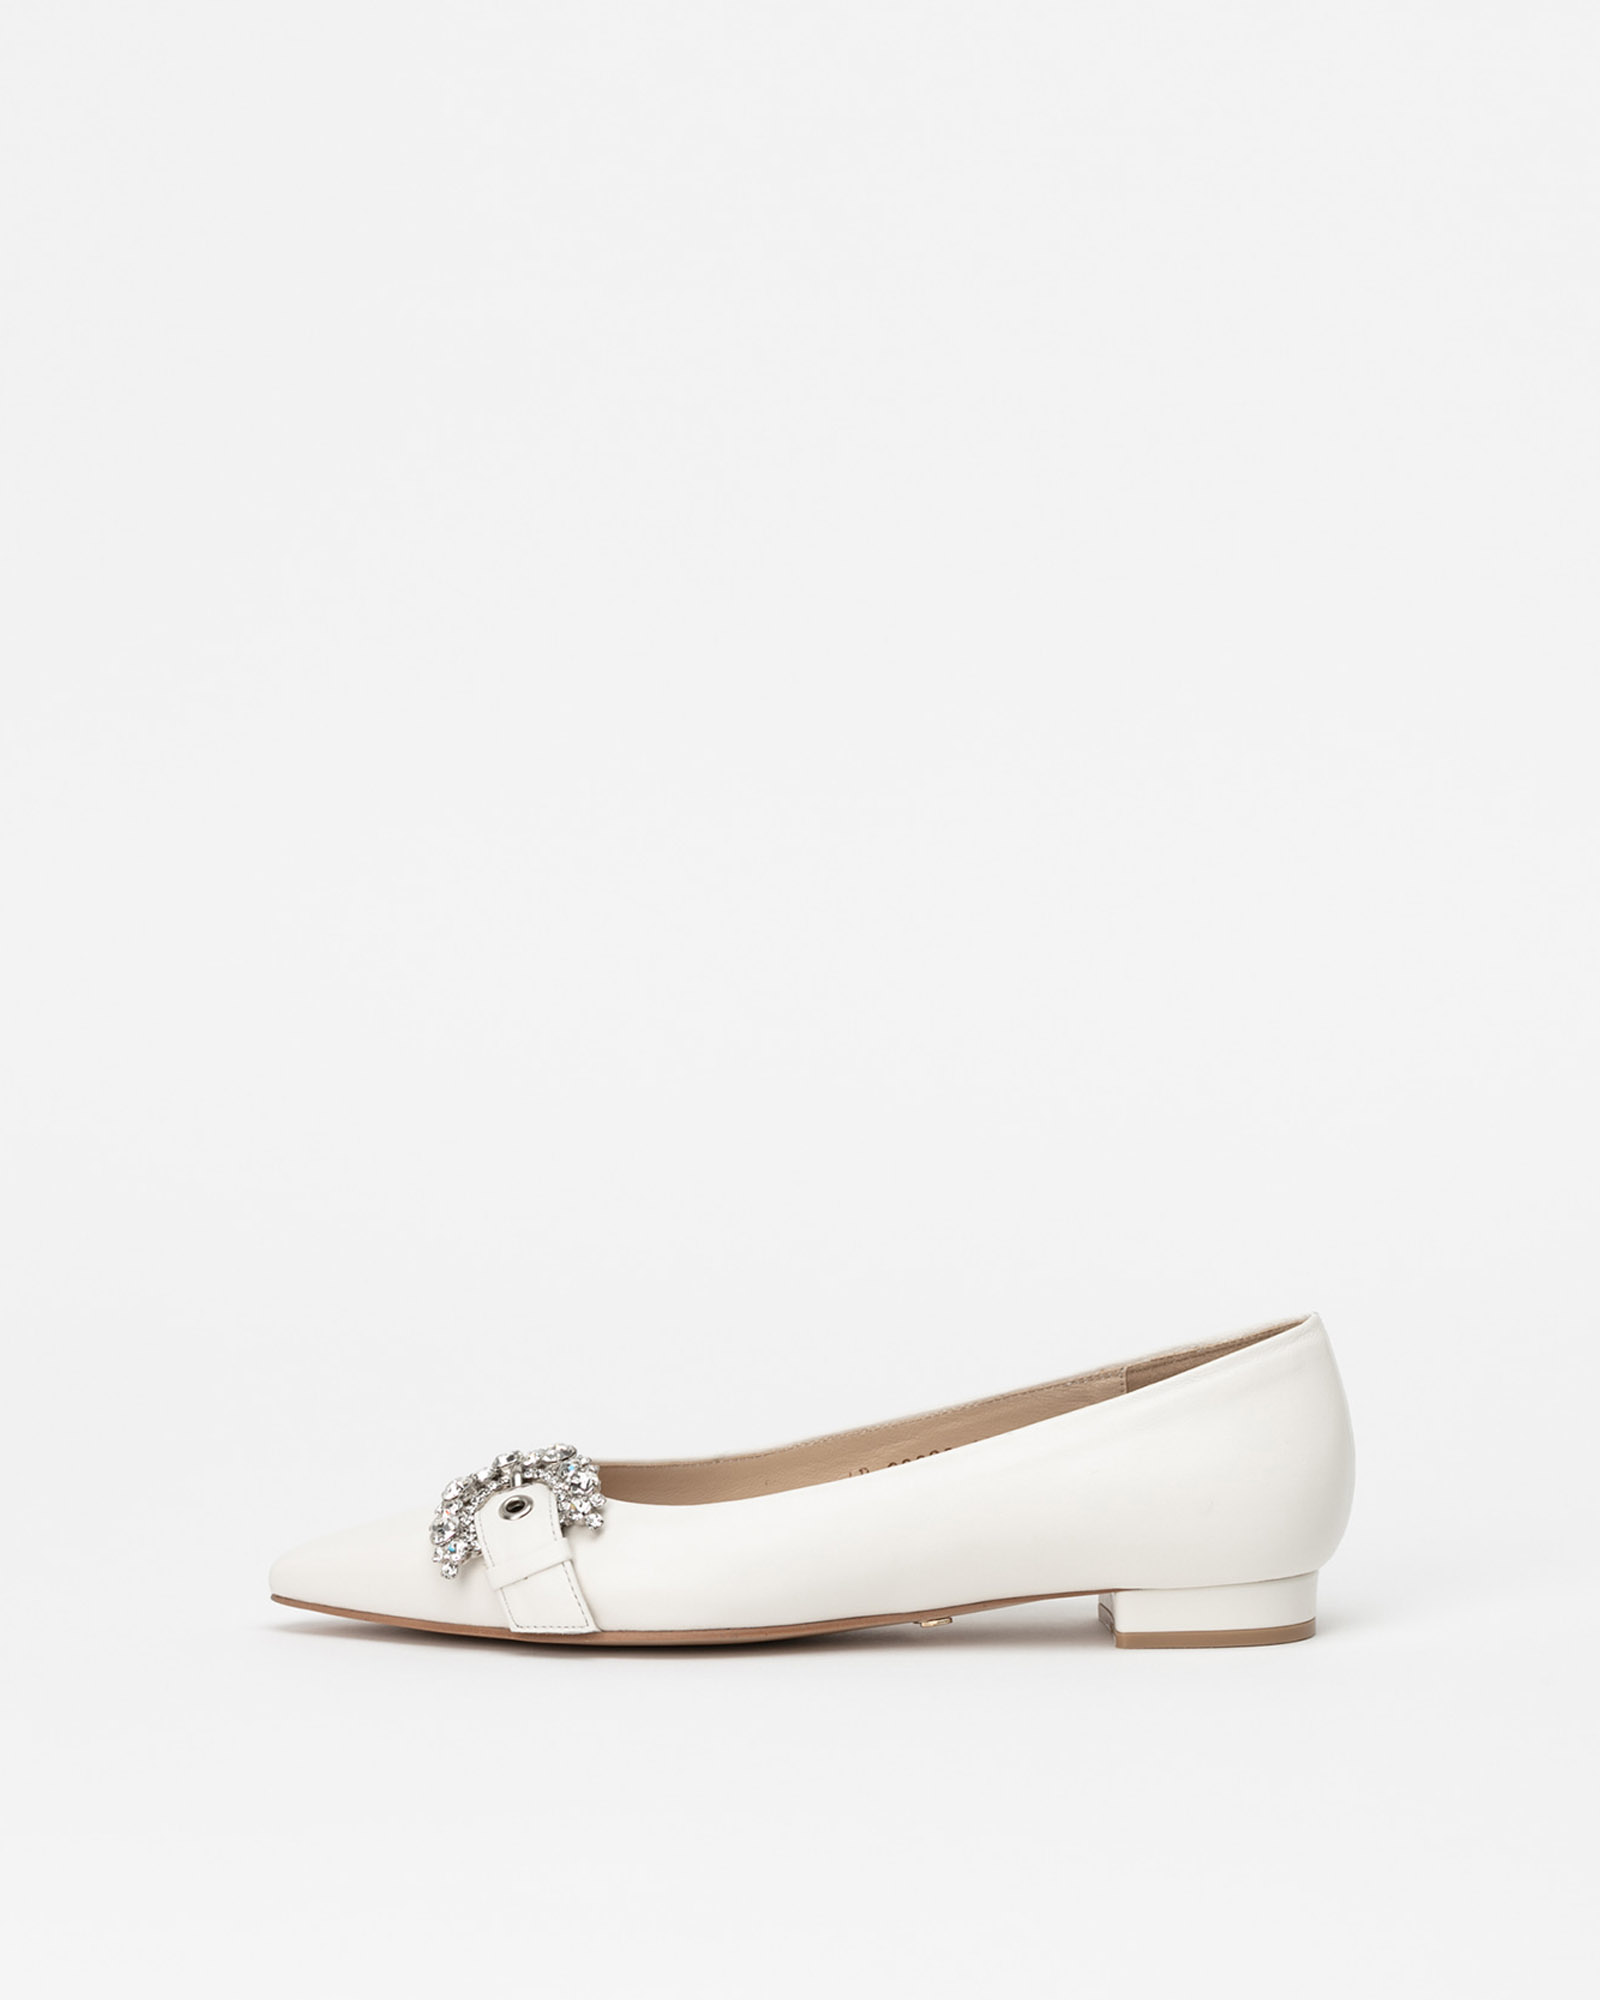 Clea Jeweled Flat shoes in Pure White